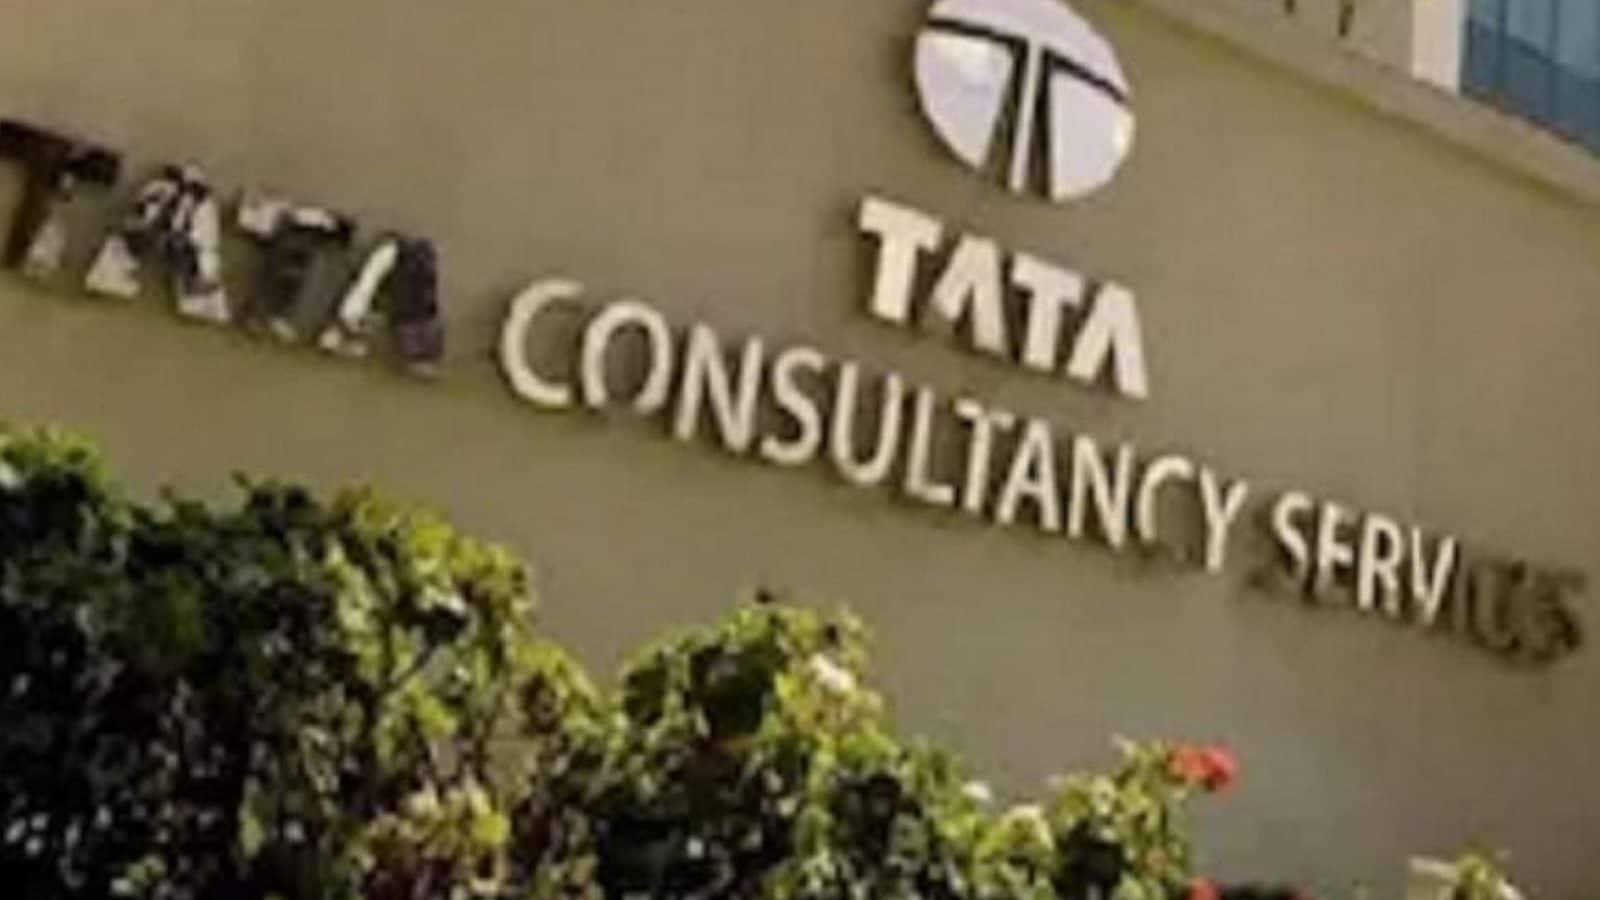 TCS Shares Hit Over 7-month high in a Volatile Market; Should you Buy, Hold or Sell?